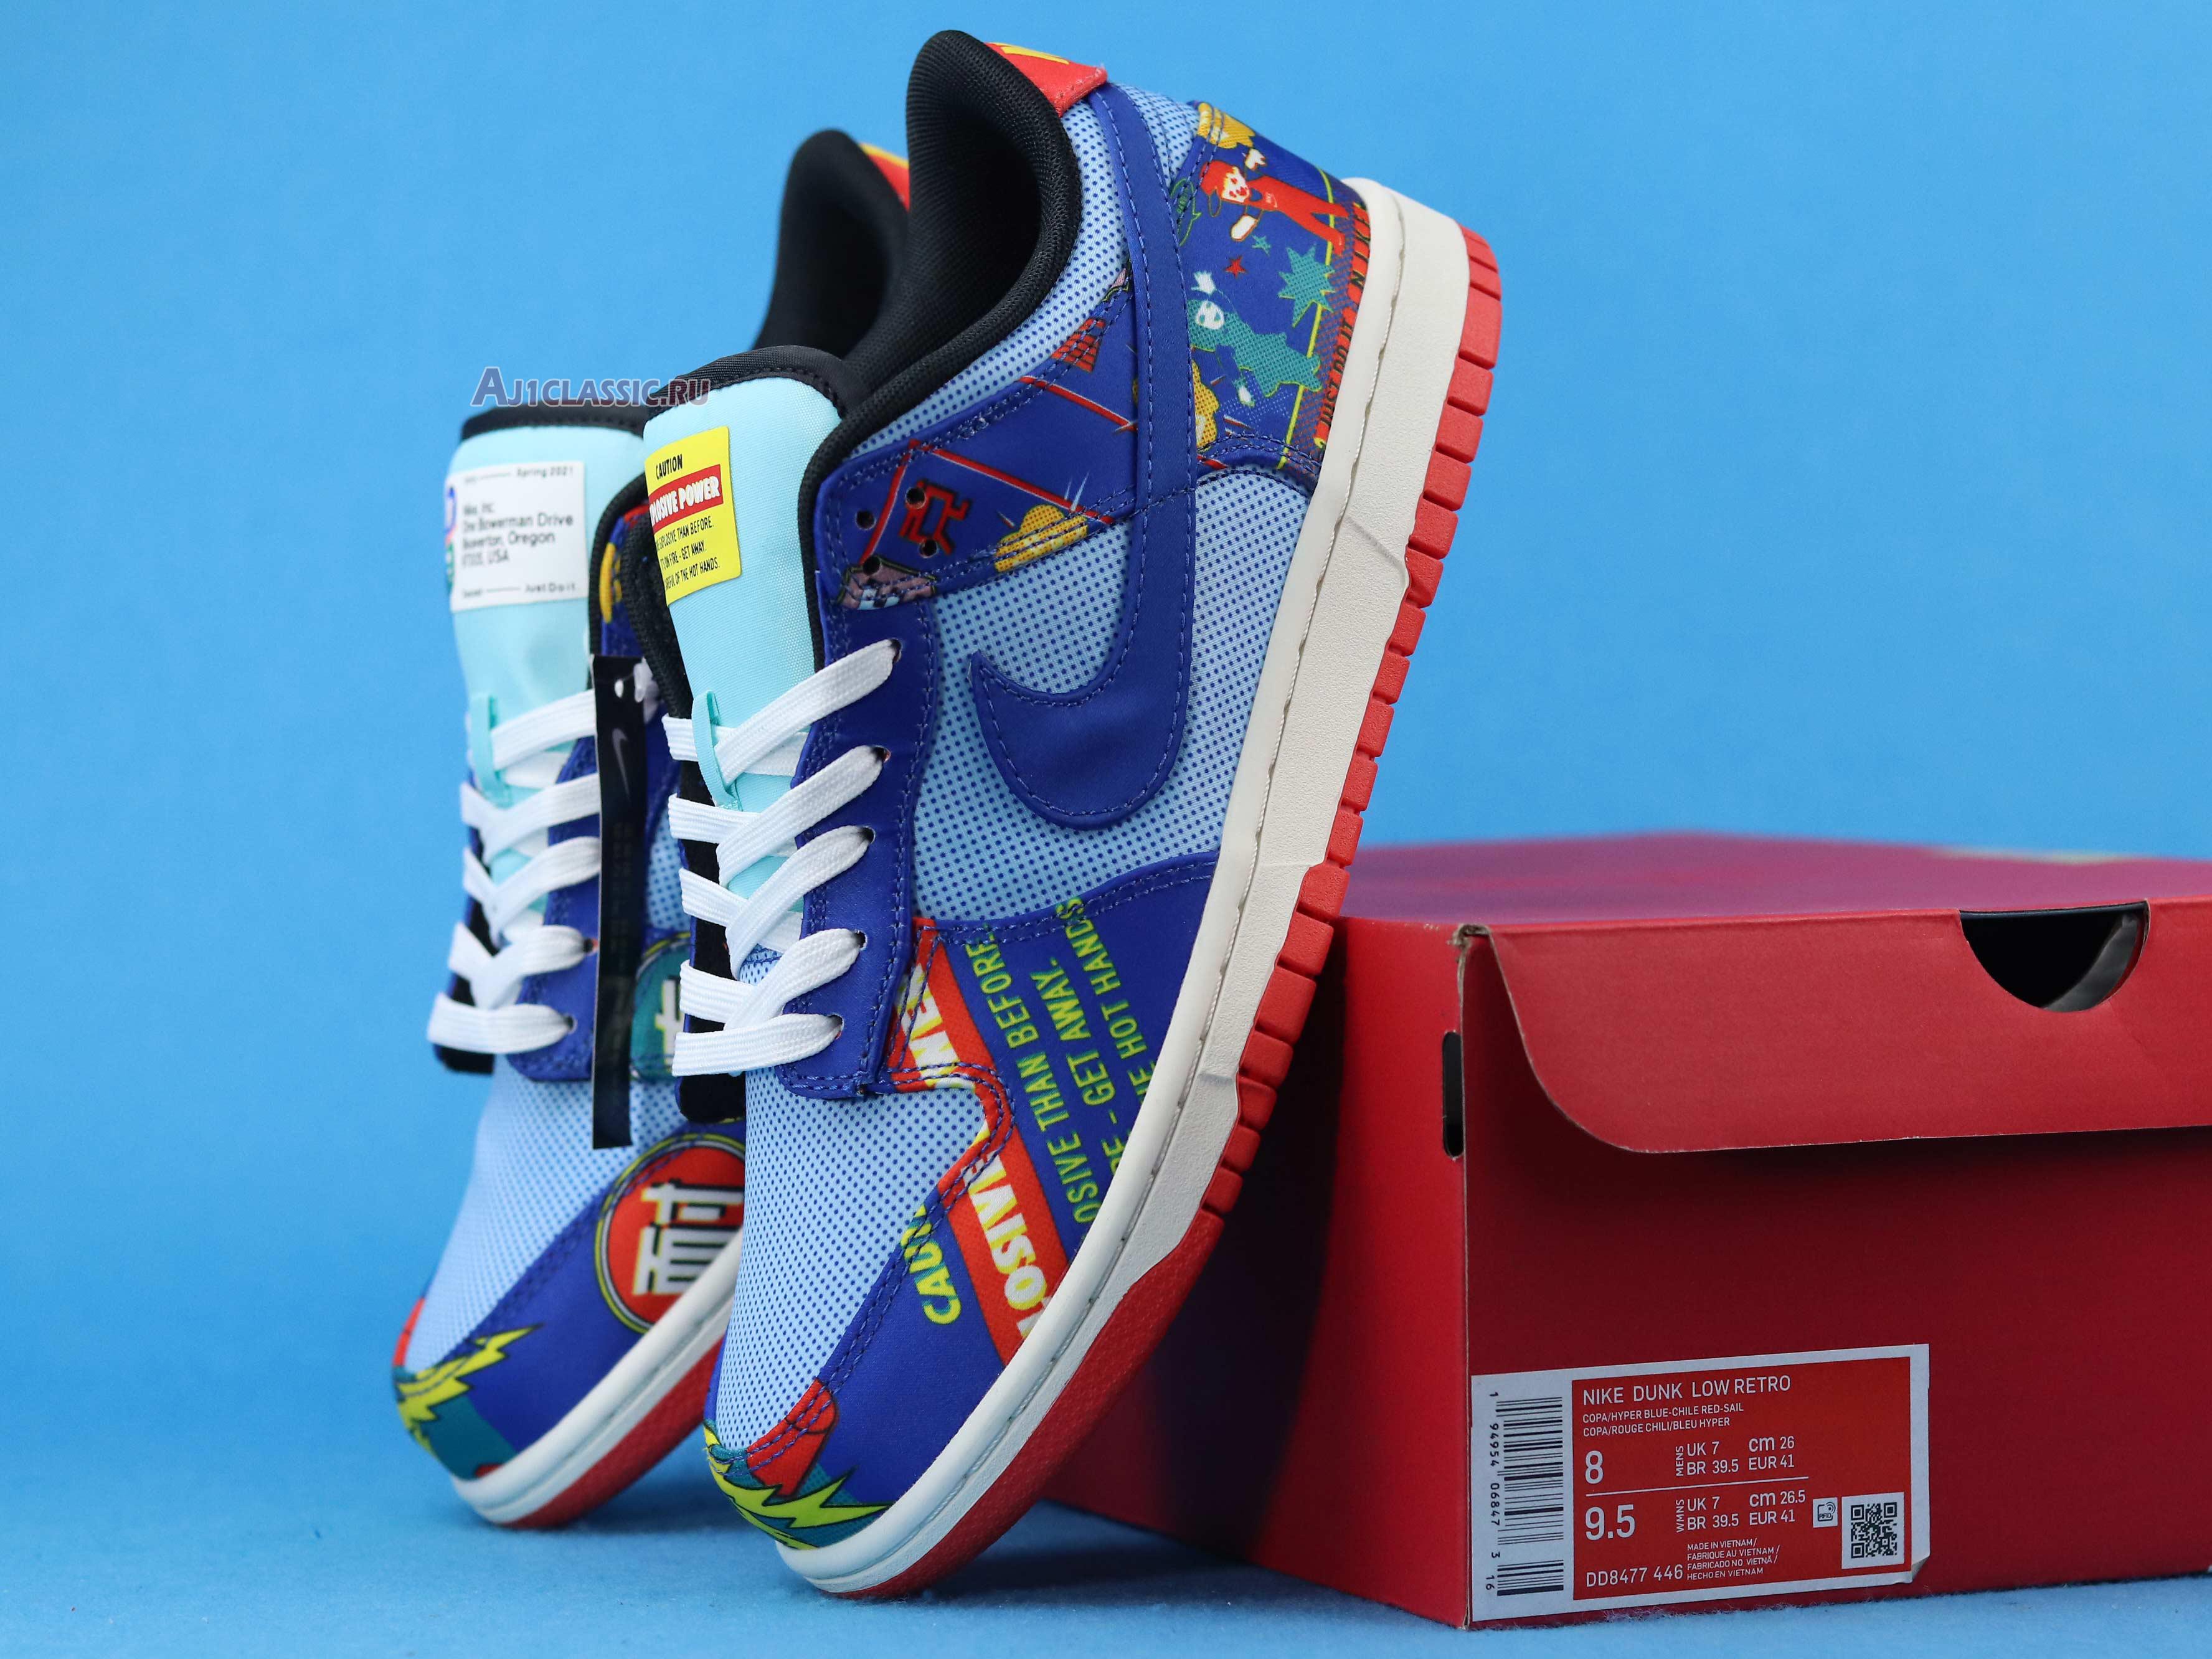 Nike Dunk Low "Chinese New Year - Firecracker" DD8477-446